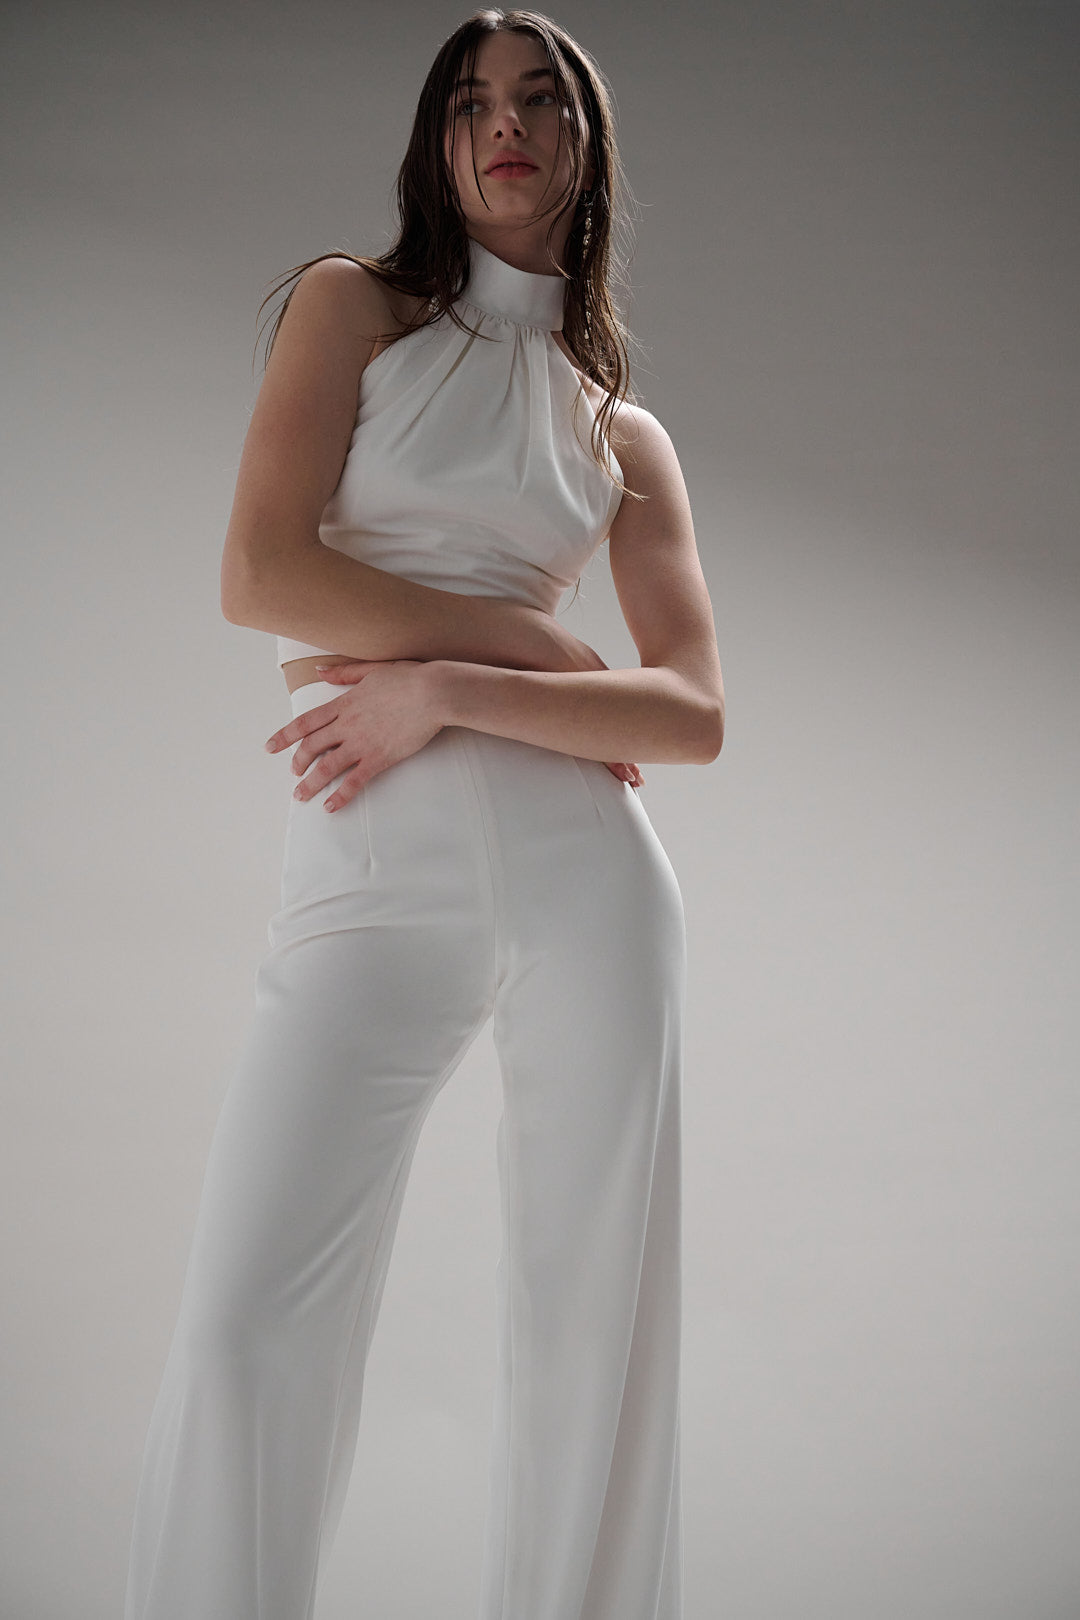 Giverny pants offer a universally flattering fit with a high natural waist, fitted hips, and flowy wide leg. Perfectly comfortable and chic for any modern bride.